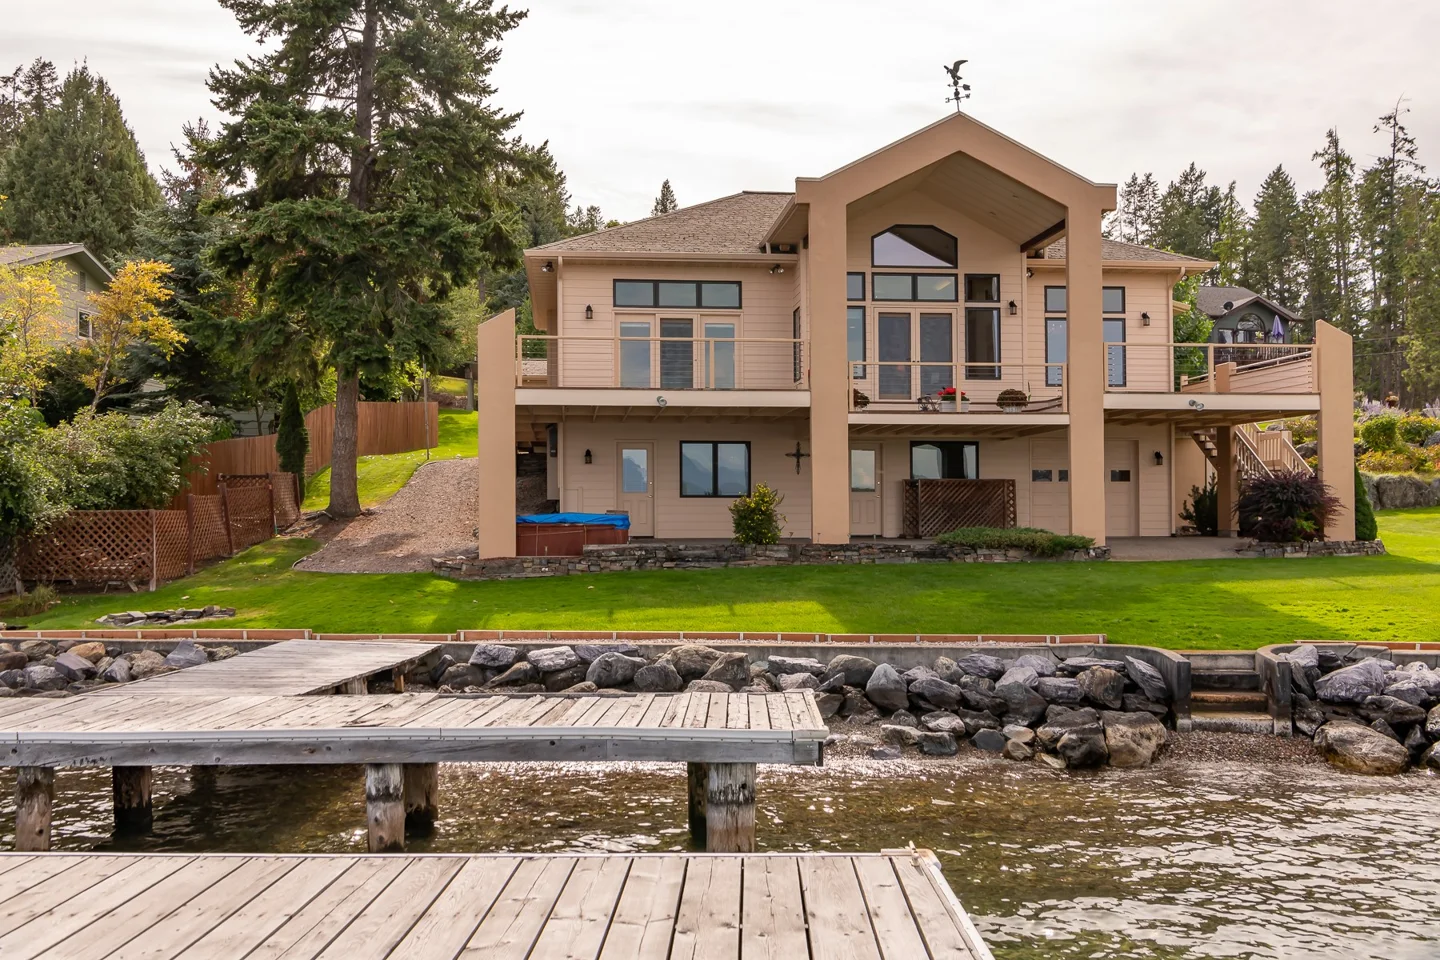 Unique Property with 2 Homes on Flathead Lake.